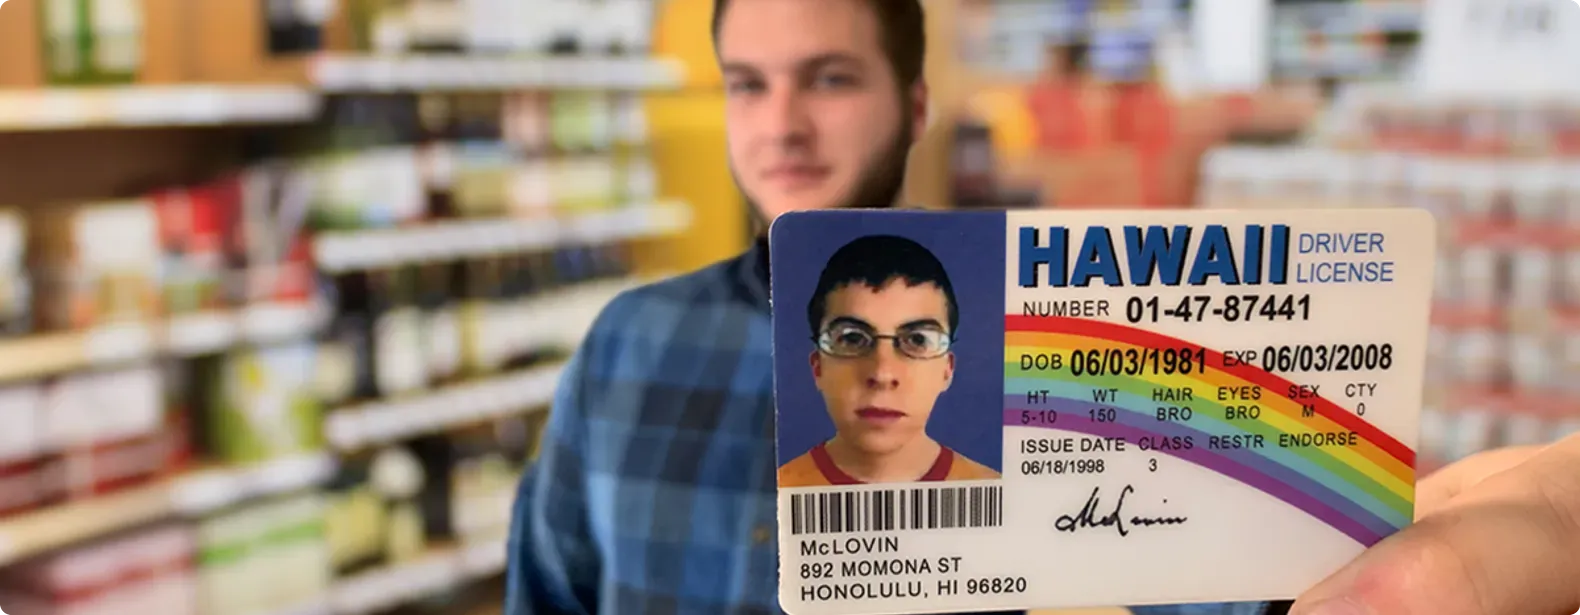 can a fake id scan